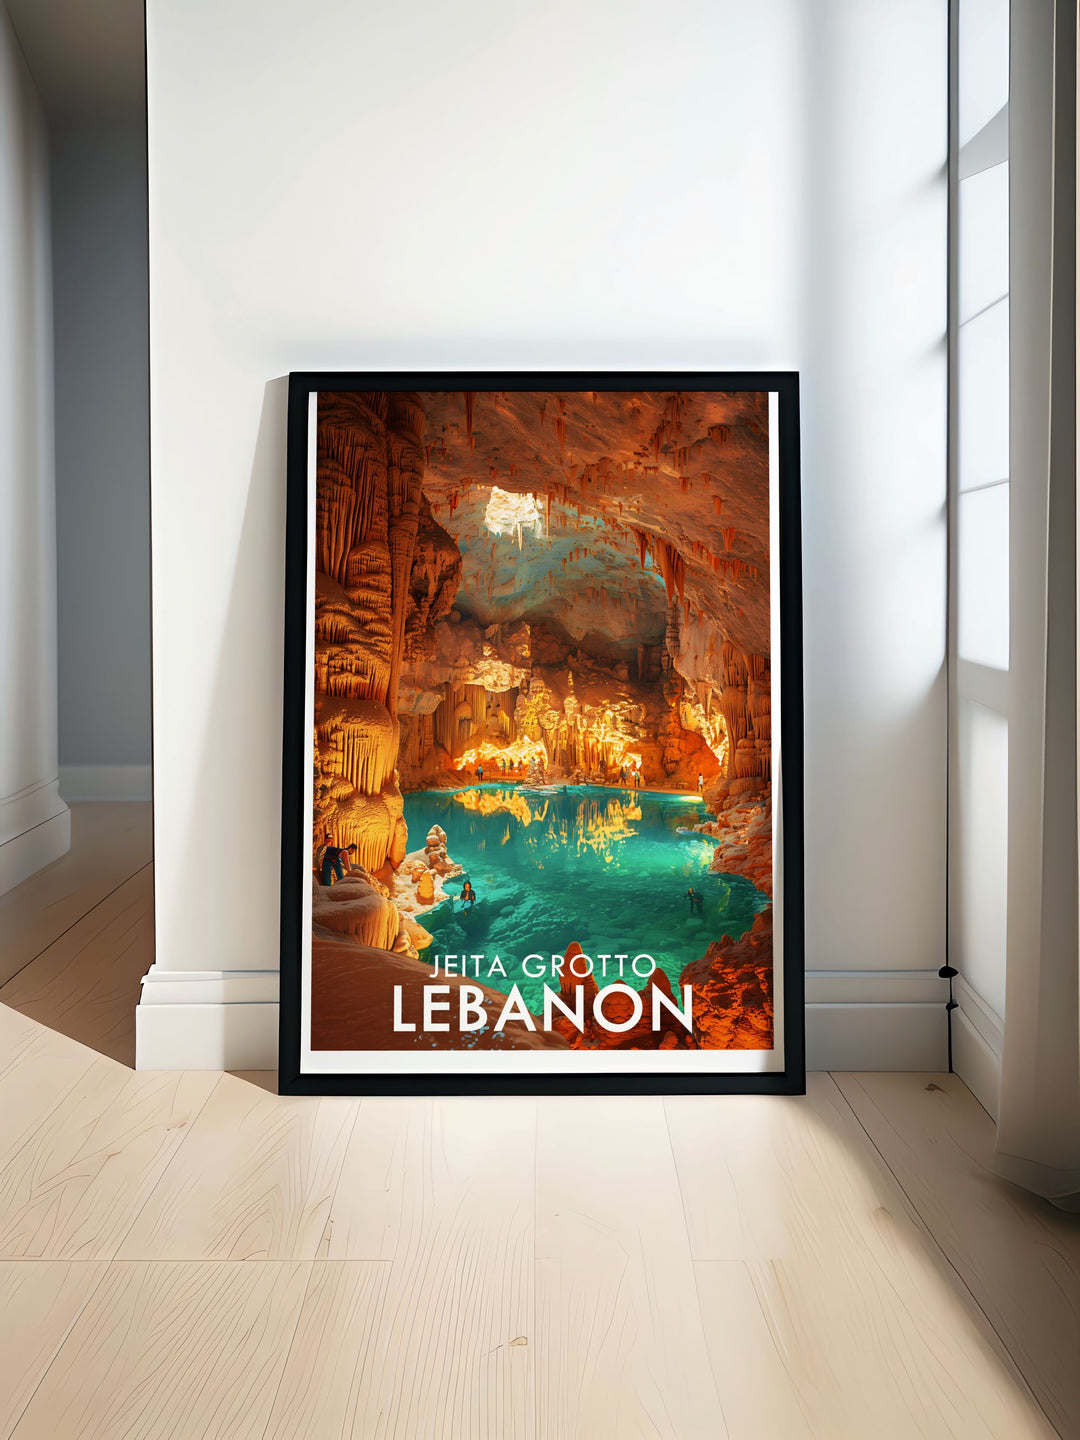 Beirut Print capturing the vibrant cityscape and rich cultural heritage of Lebanon complemented by Jeita Grotto vintage print showcasing stunning limestone formations and underground rivers perfect for home decor and gifts for travel enthusiasts and art lovers